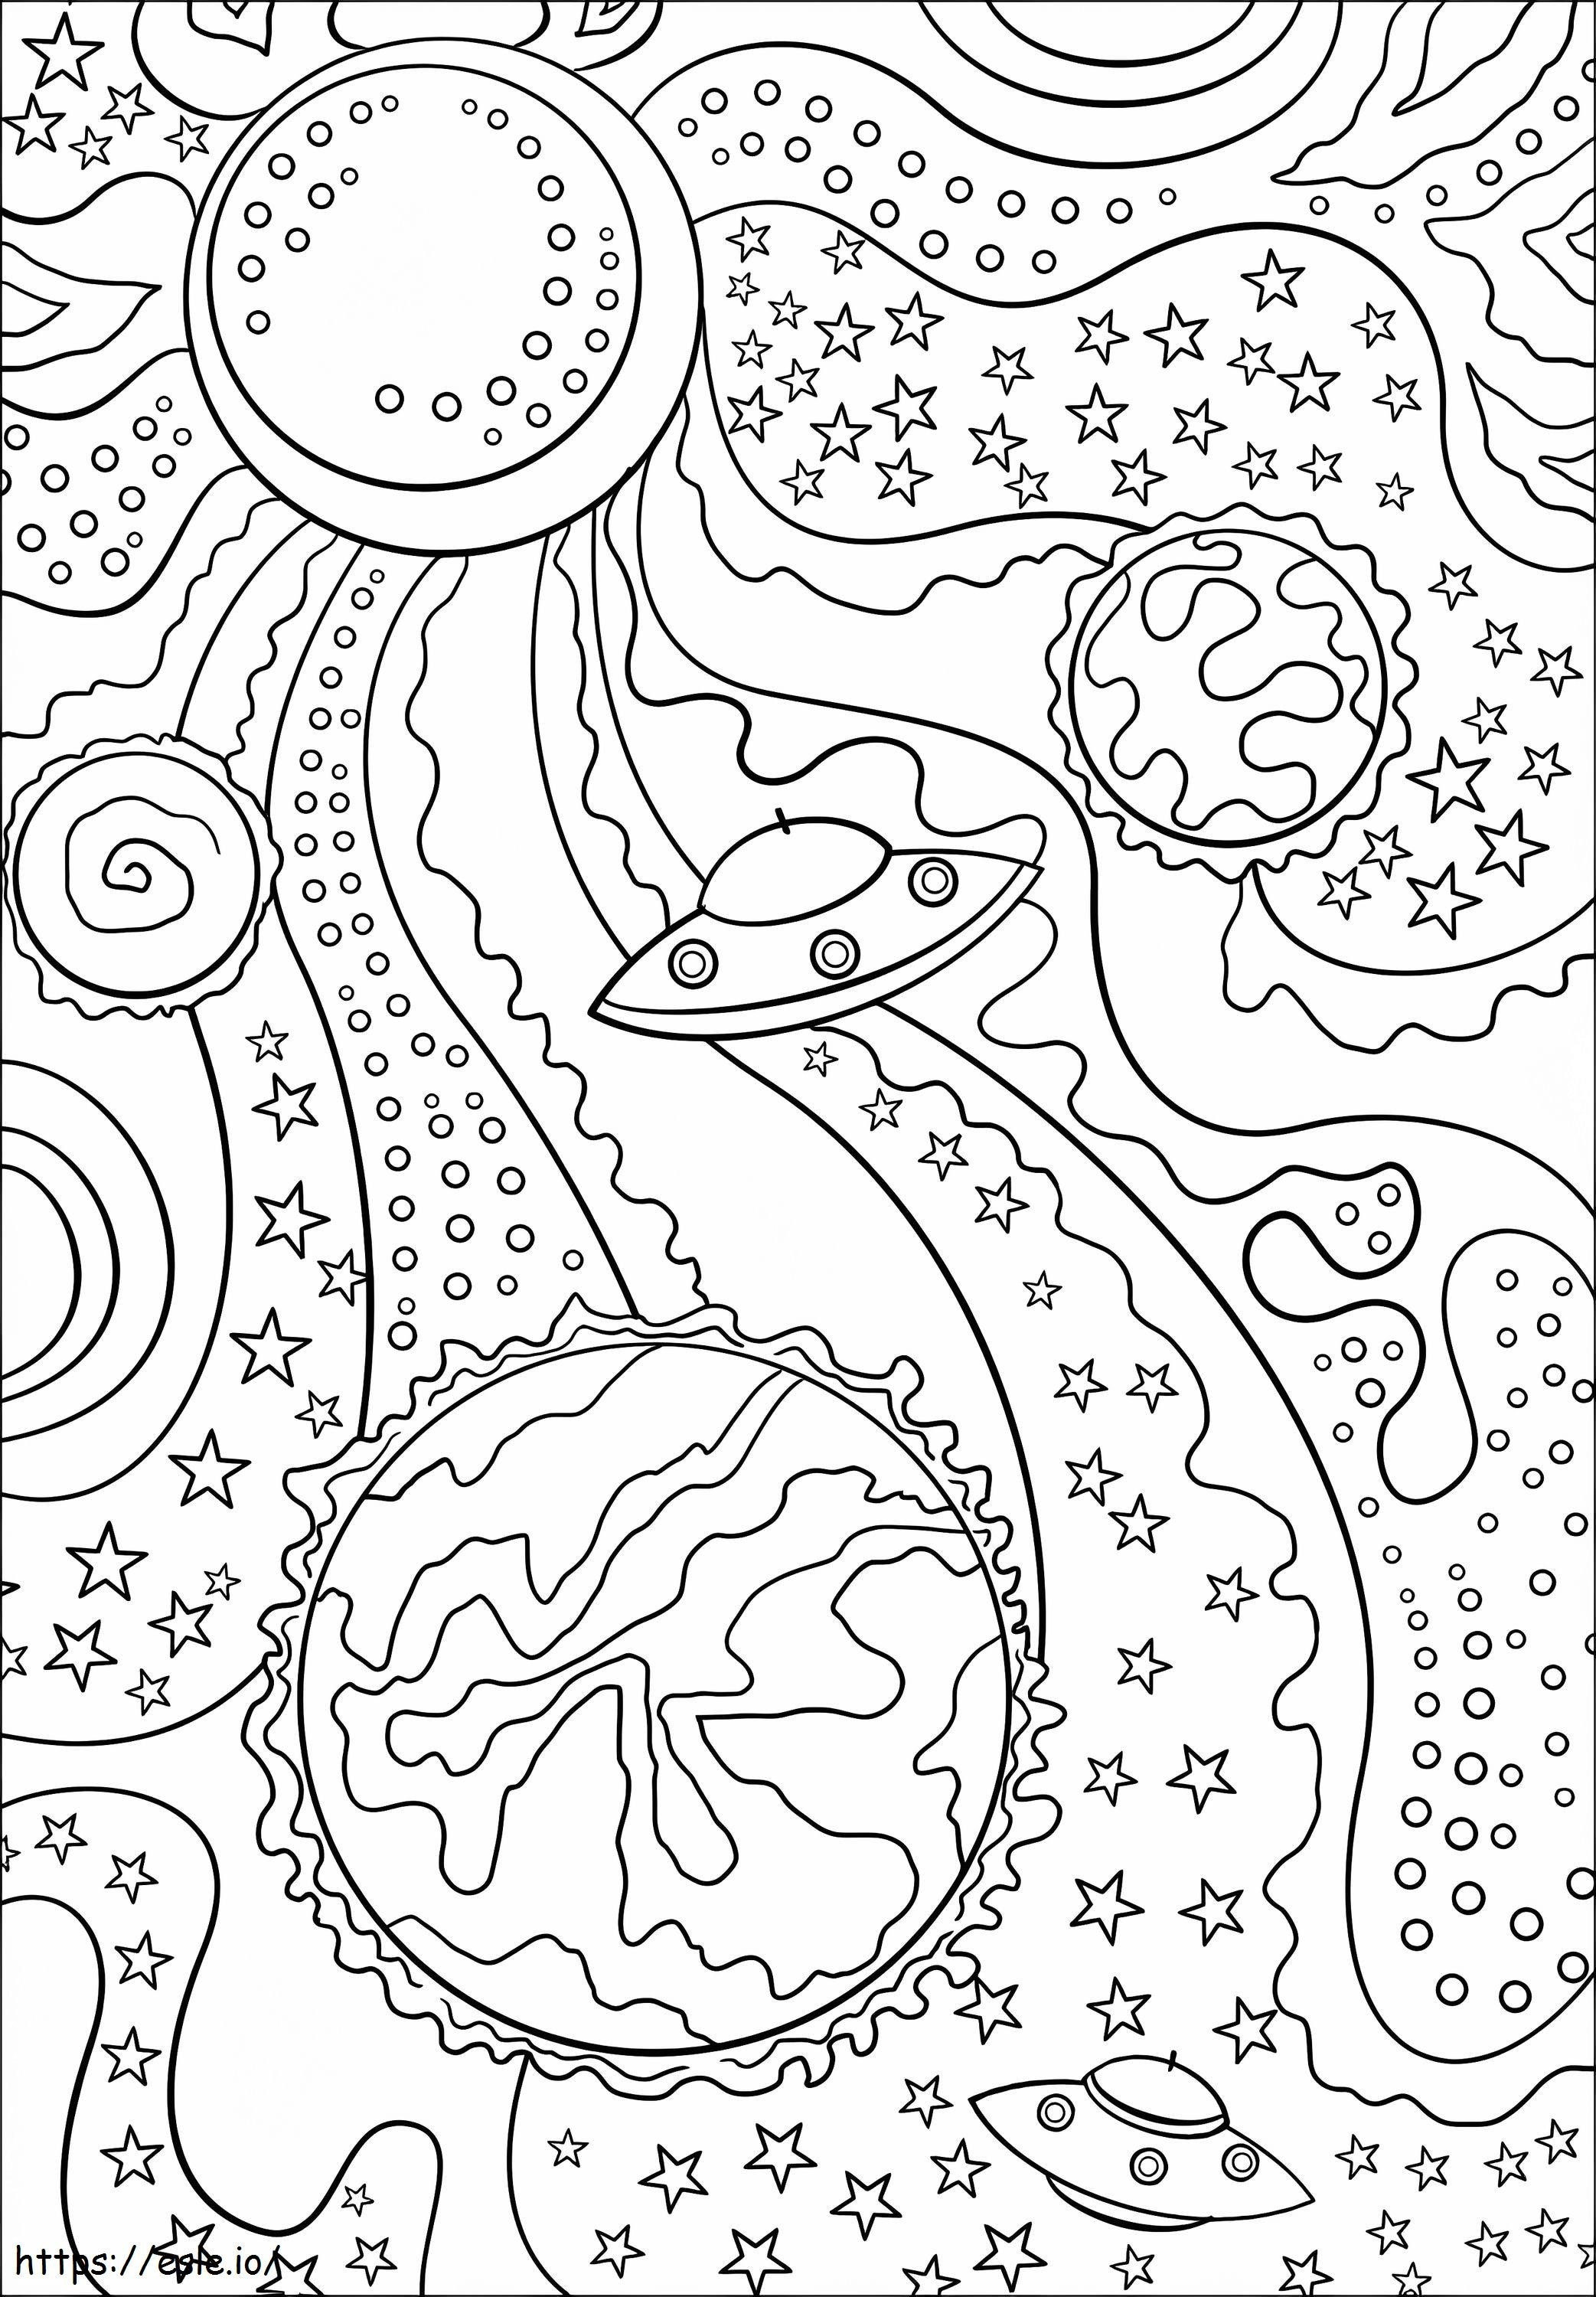 Space Trippy Coloring Page 1 coloring page